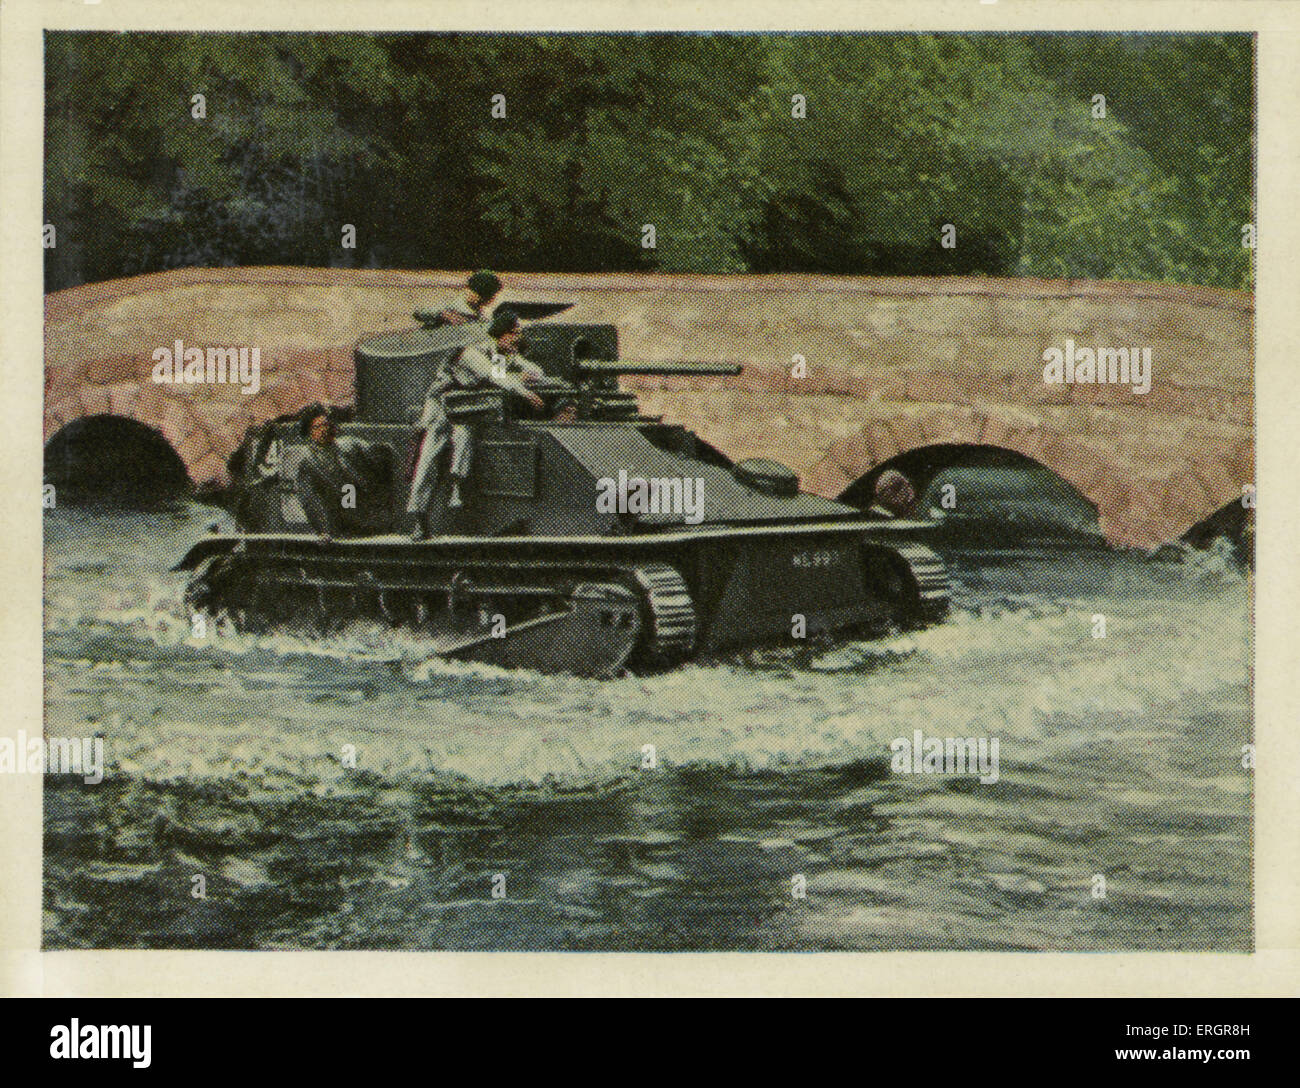 English Vickers tank  crossing water.  amphibious     (Source: Cigarette cards published in Germany c.1934 reviewing military Stock Photo